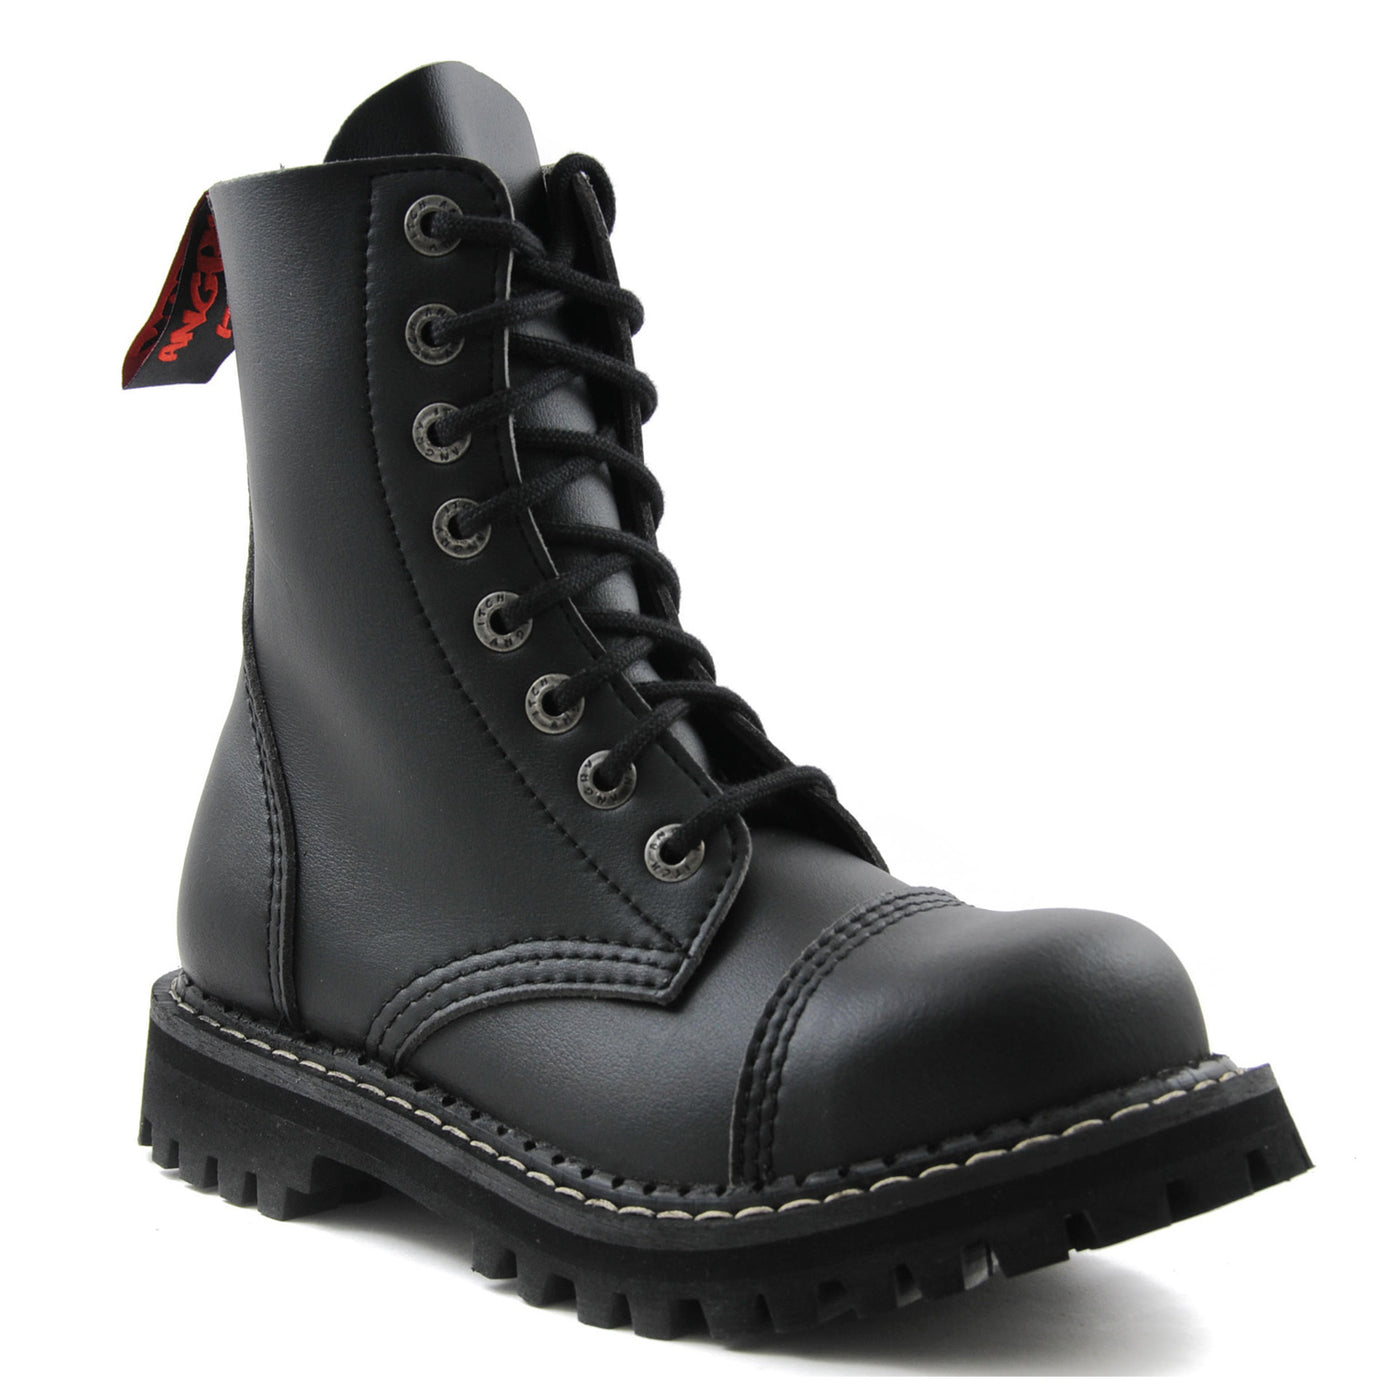 Angry Itch 8 Eyelet Boots with Steel Toe Cap Black PU Vegan Leather